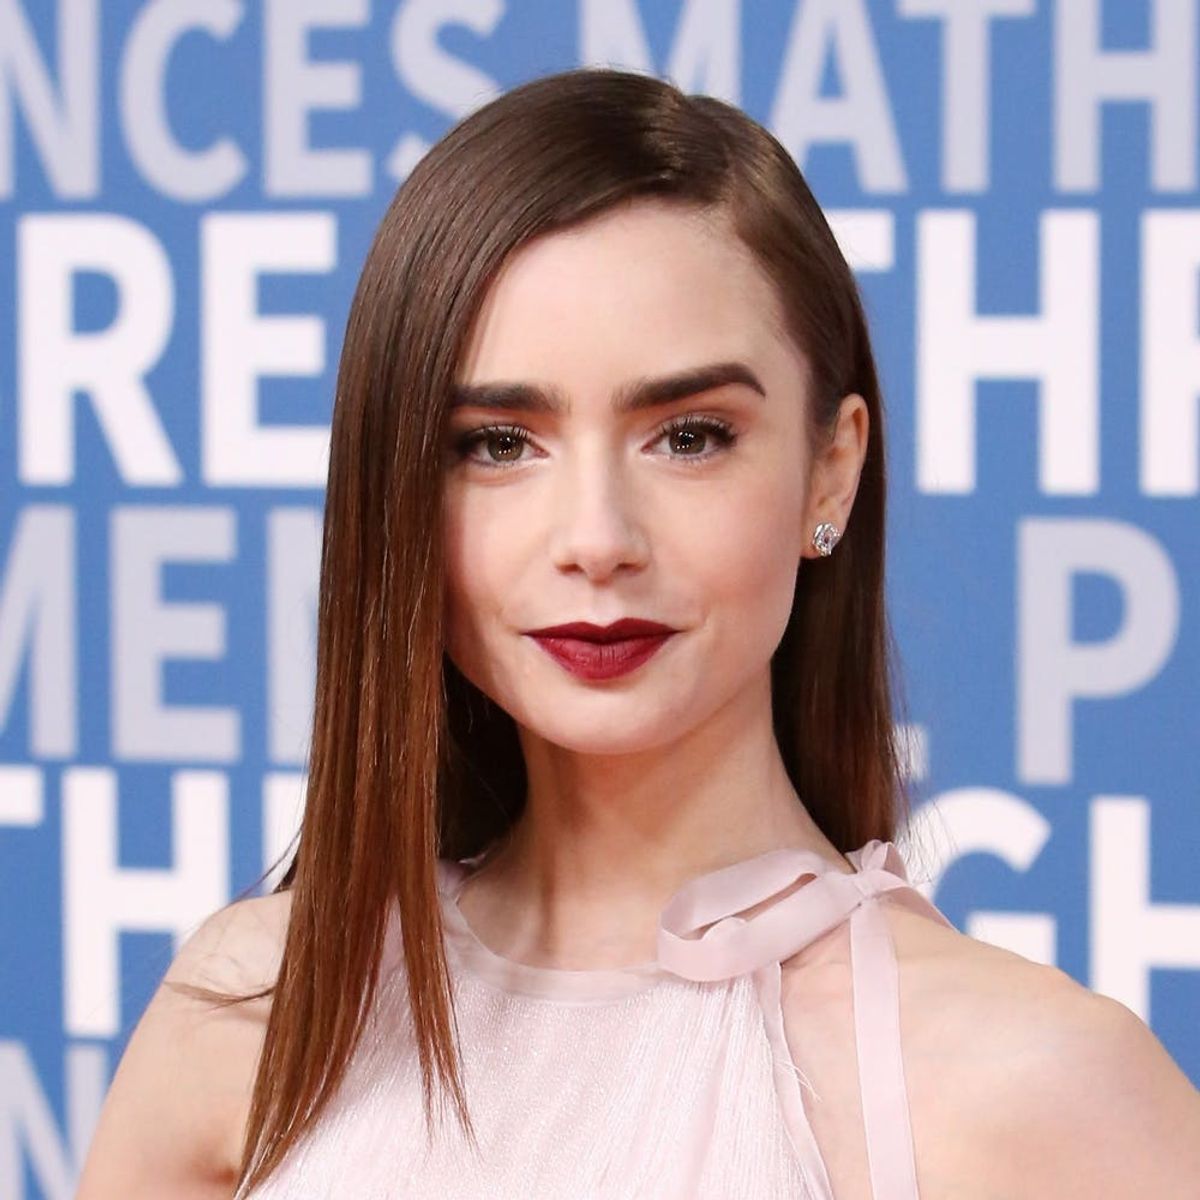 See the Major Tress Transformation Lily Collins Made Overnight